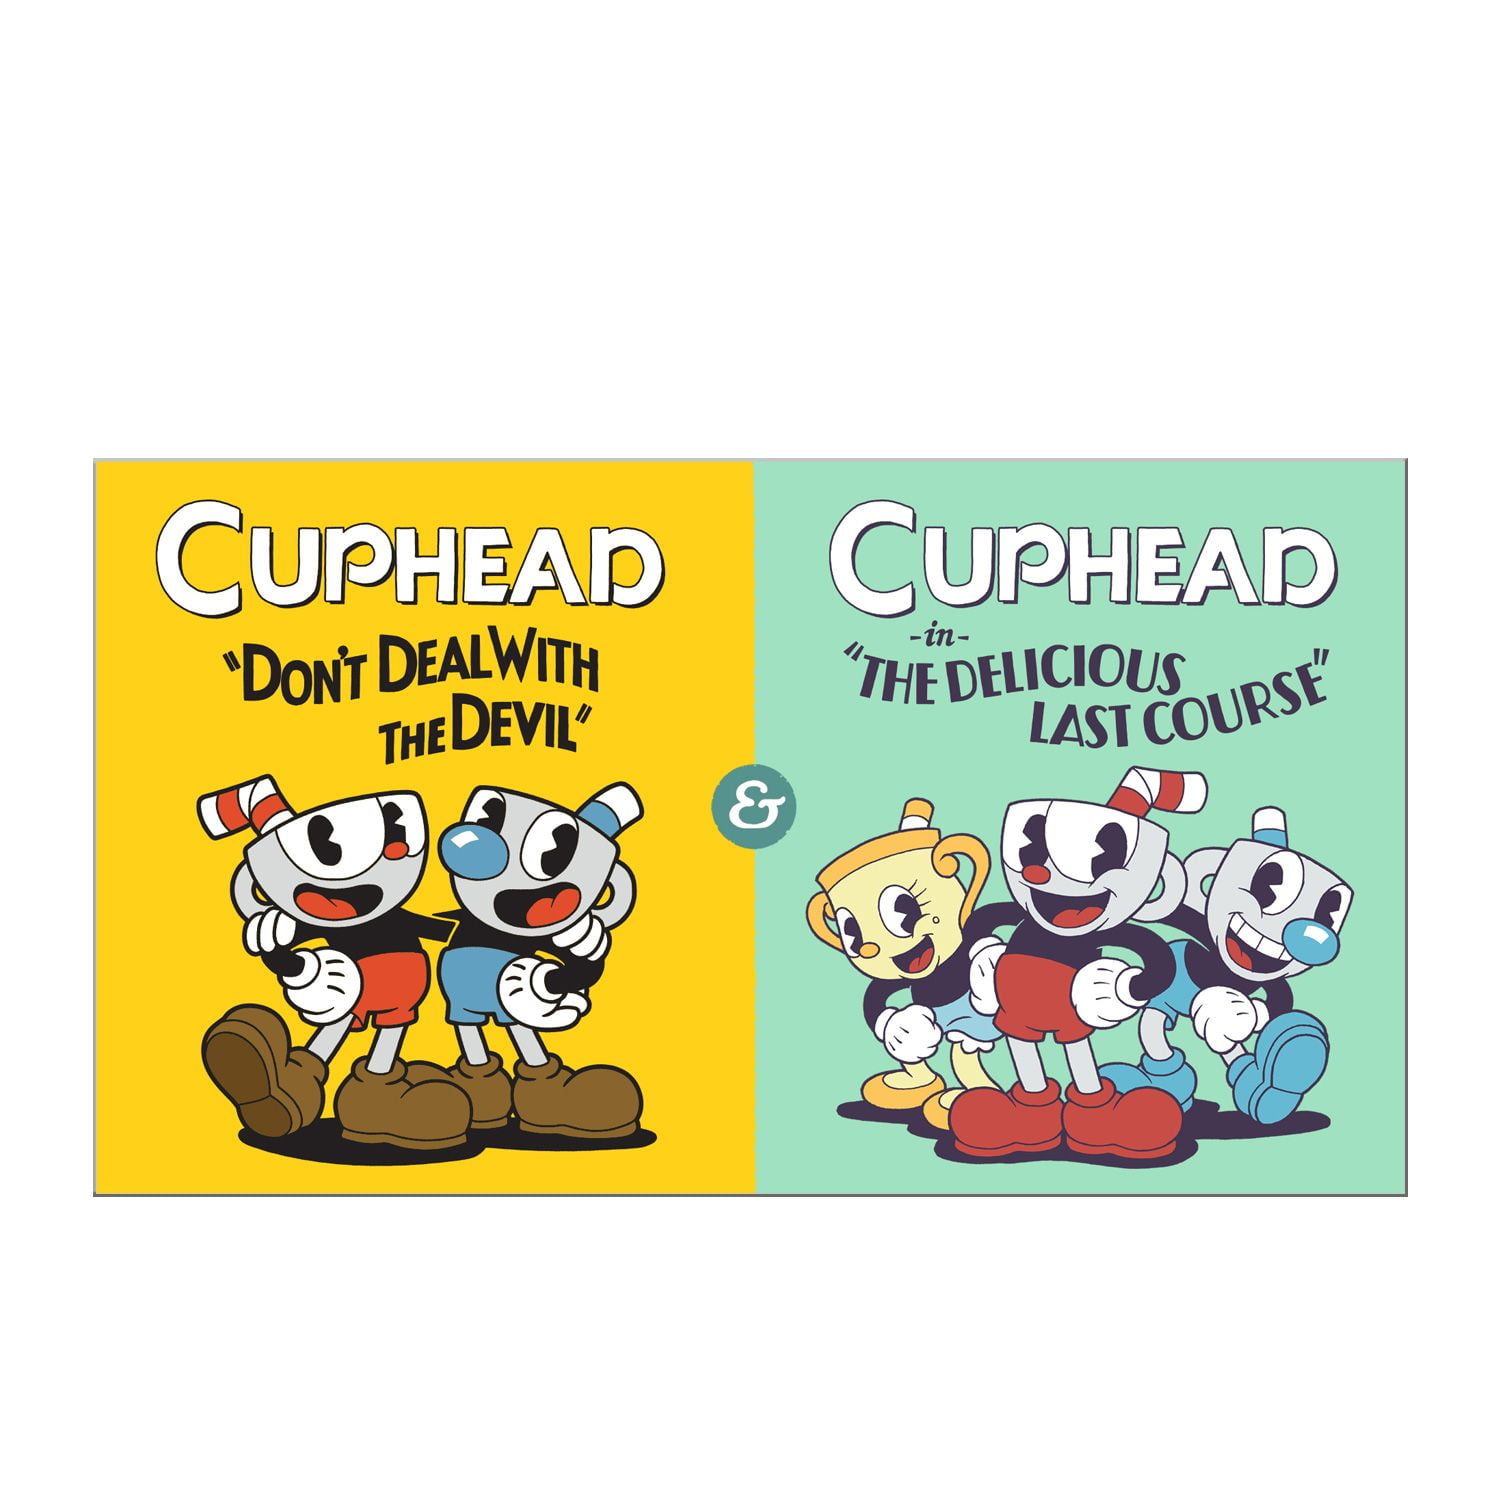 CUPHEAD NINTENDO SWITCH LAUNCH EDITION THE DELICIOUS LAST COURSE CARD NEW  SEALED 811949035424